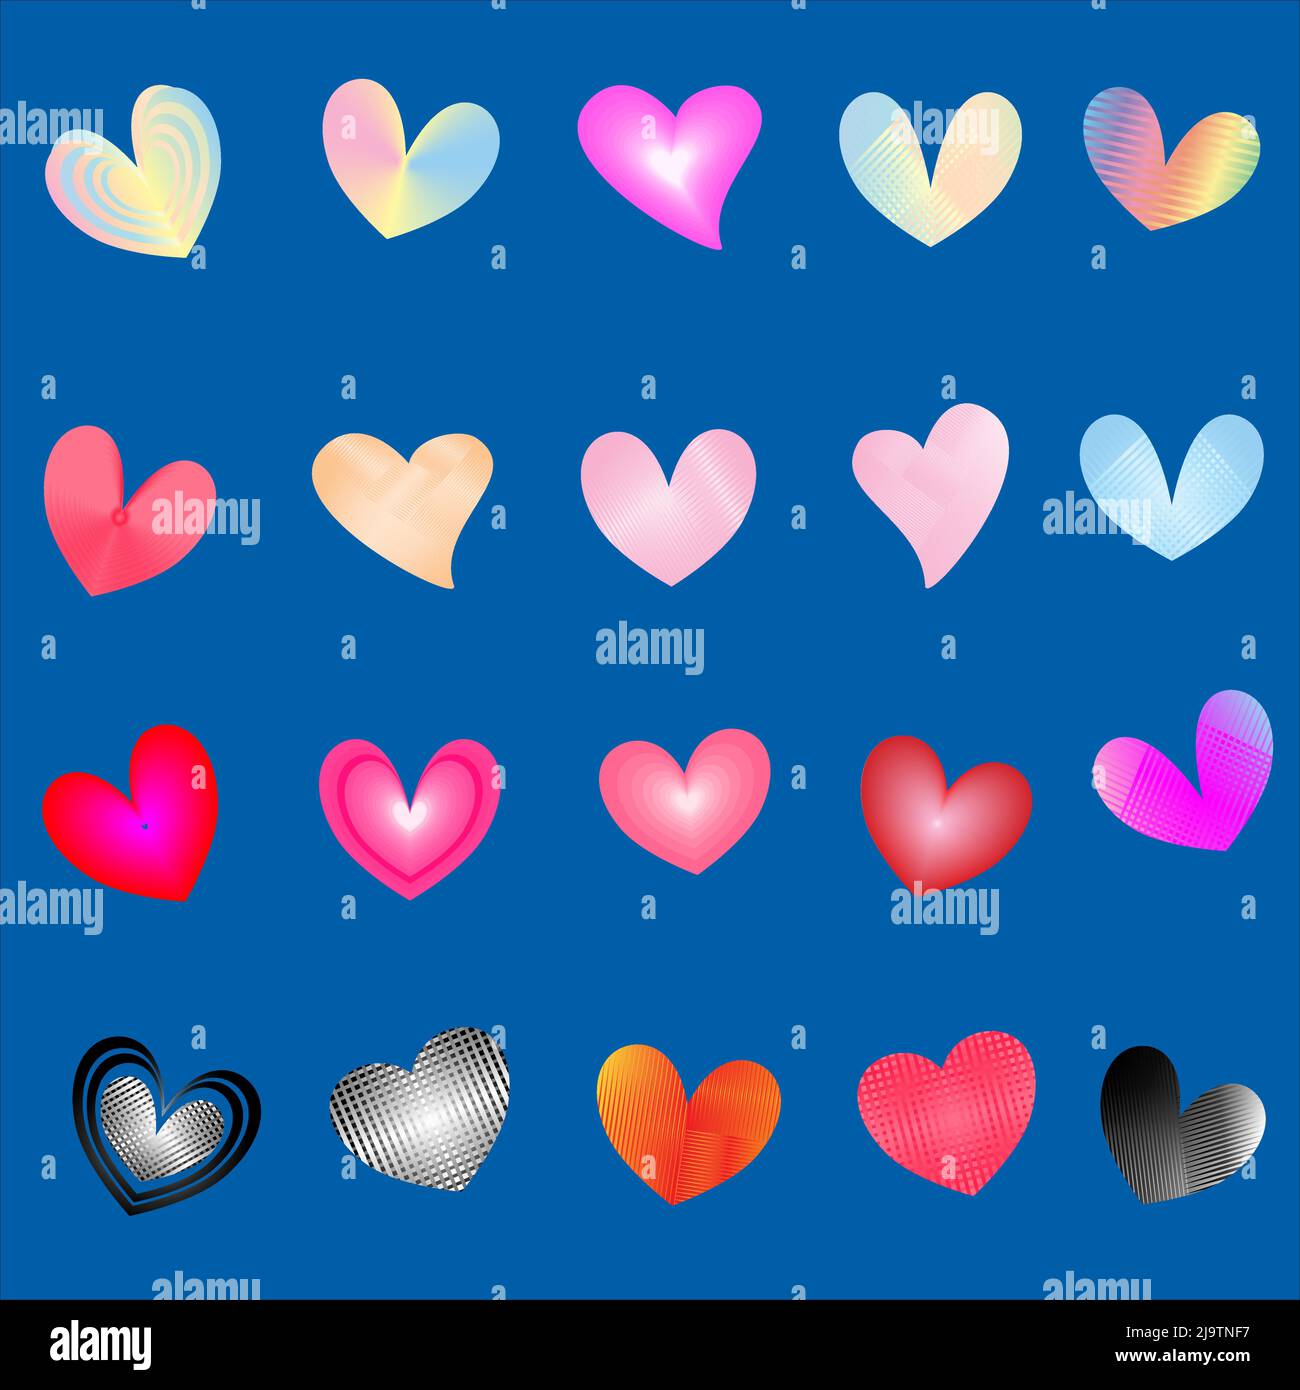 Heart watercolor set for happy valentines day Vector Image